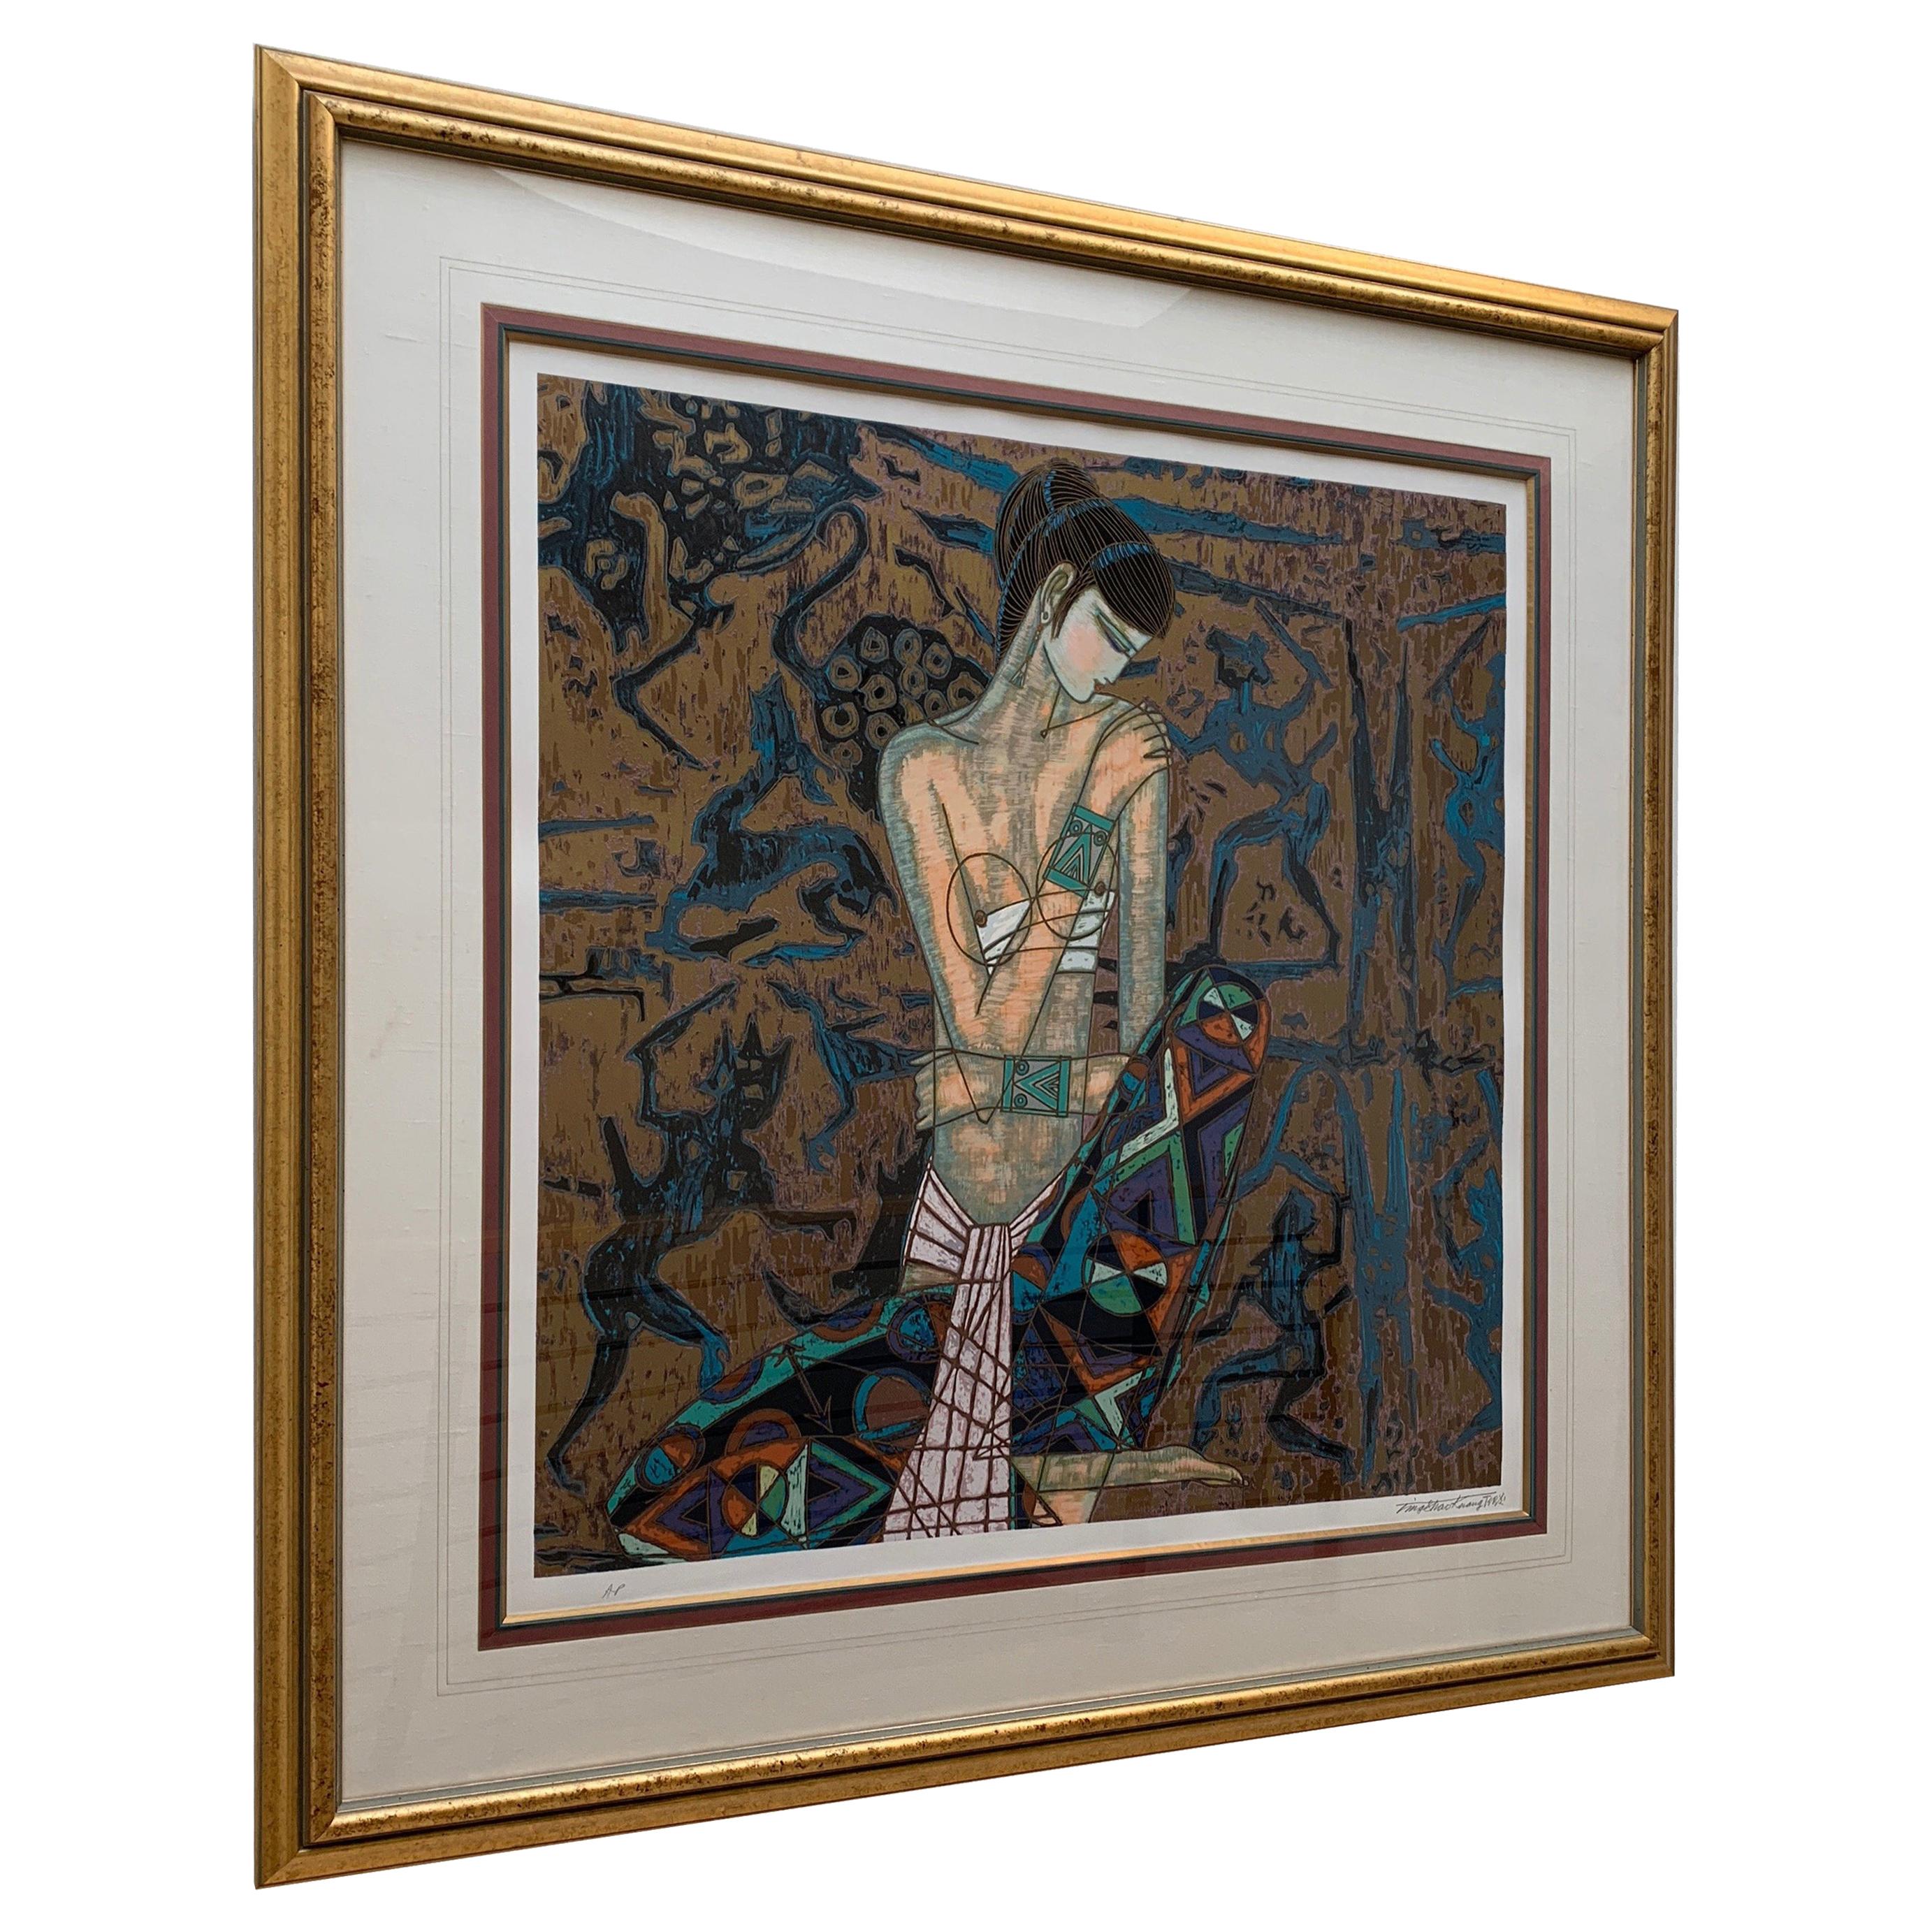 Contemporary Art Large Framed Print Ting Shao Kuang AP For Sale